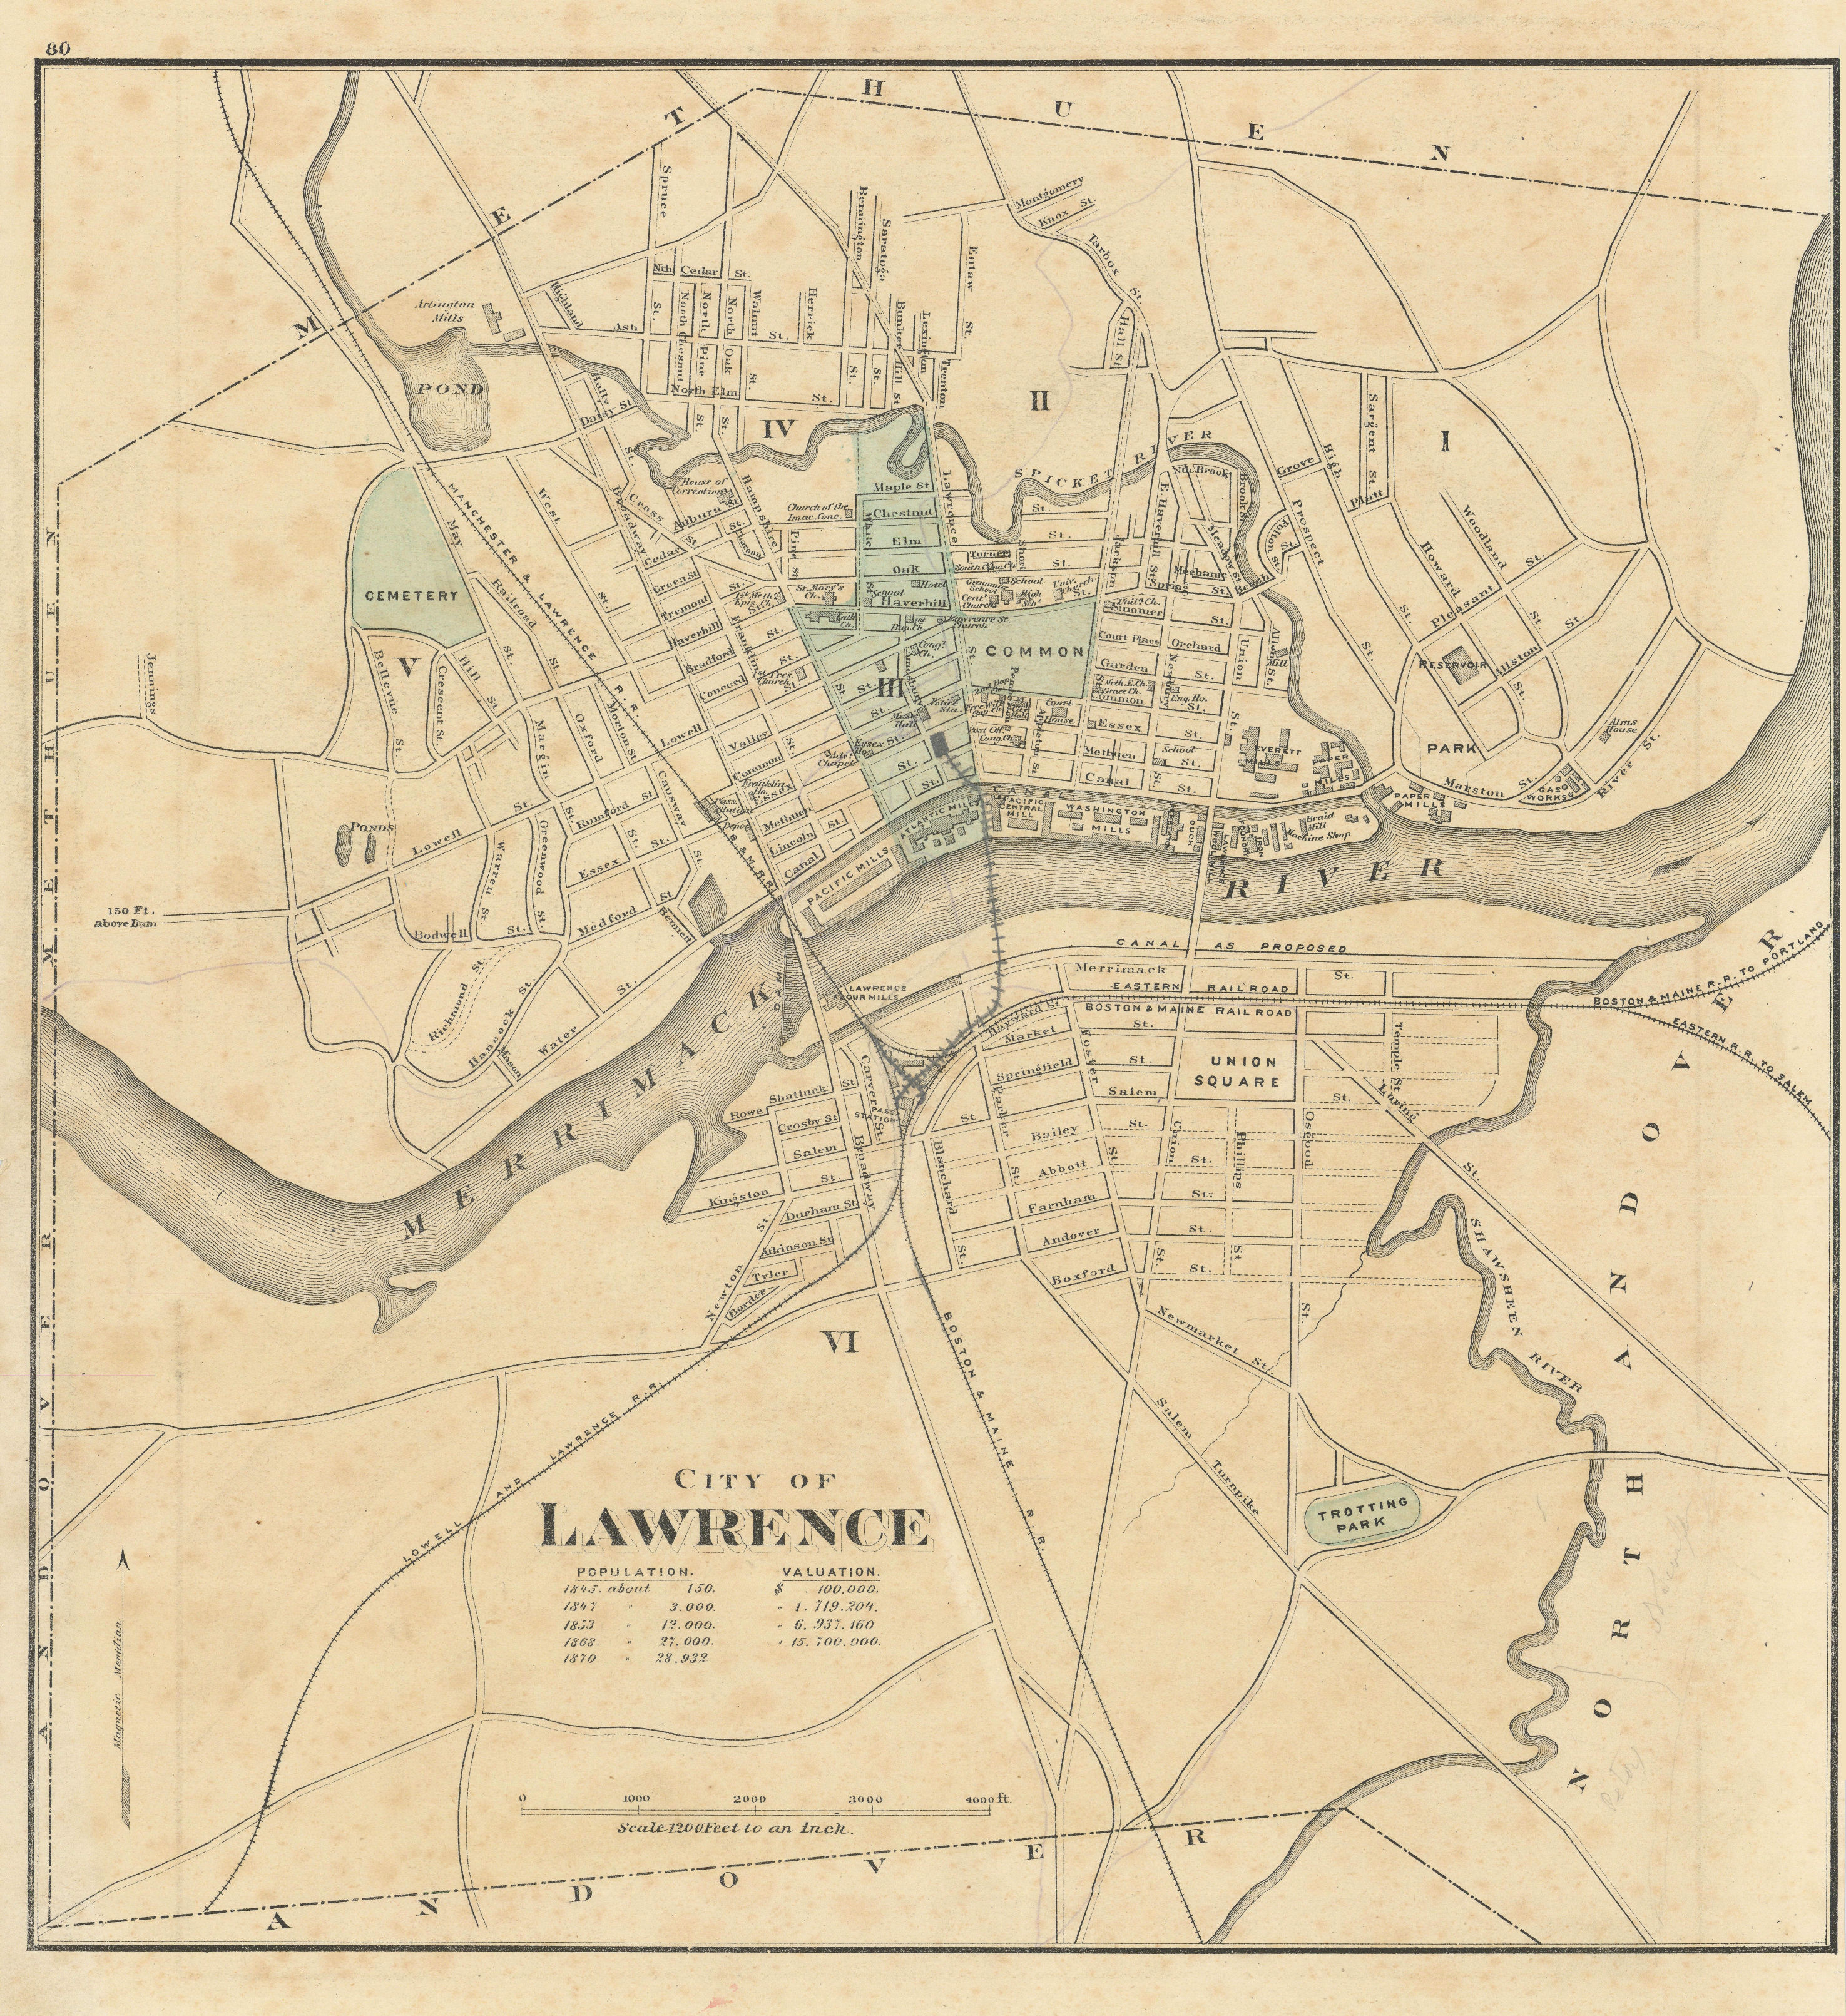 Associate Product City of Lawrence, Massachusetts. Town plan. WALLING & GRAY 1871 old map